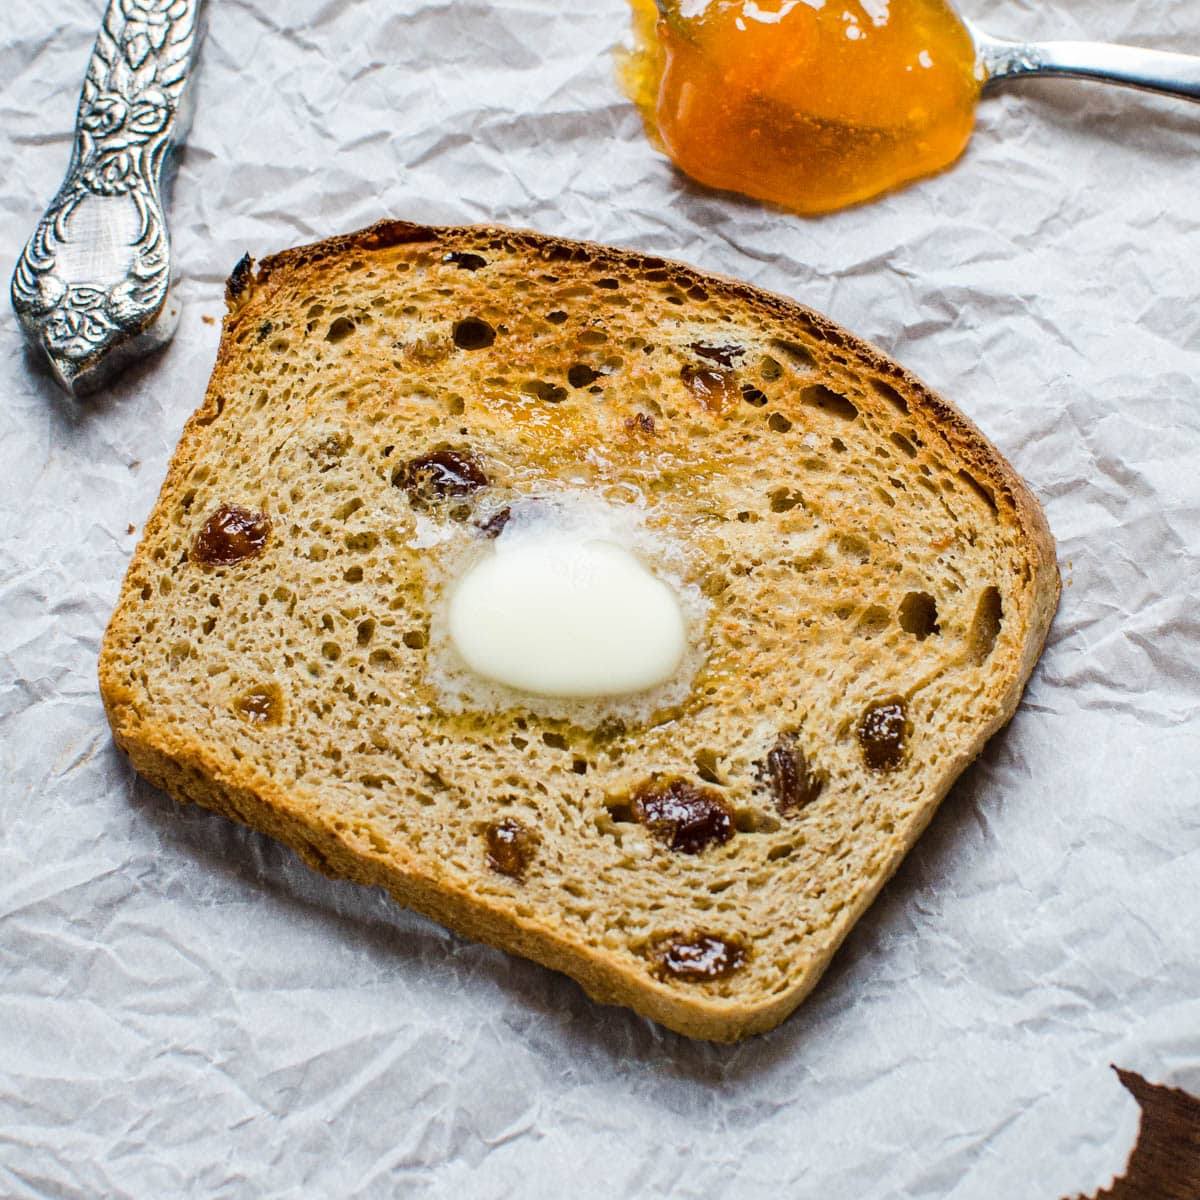 A slice of toasted oatmeal raisin bread with a spoonful of jam.